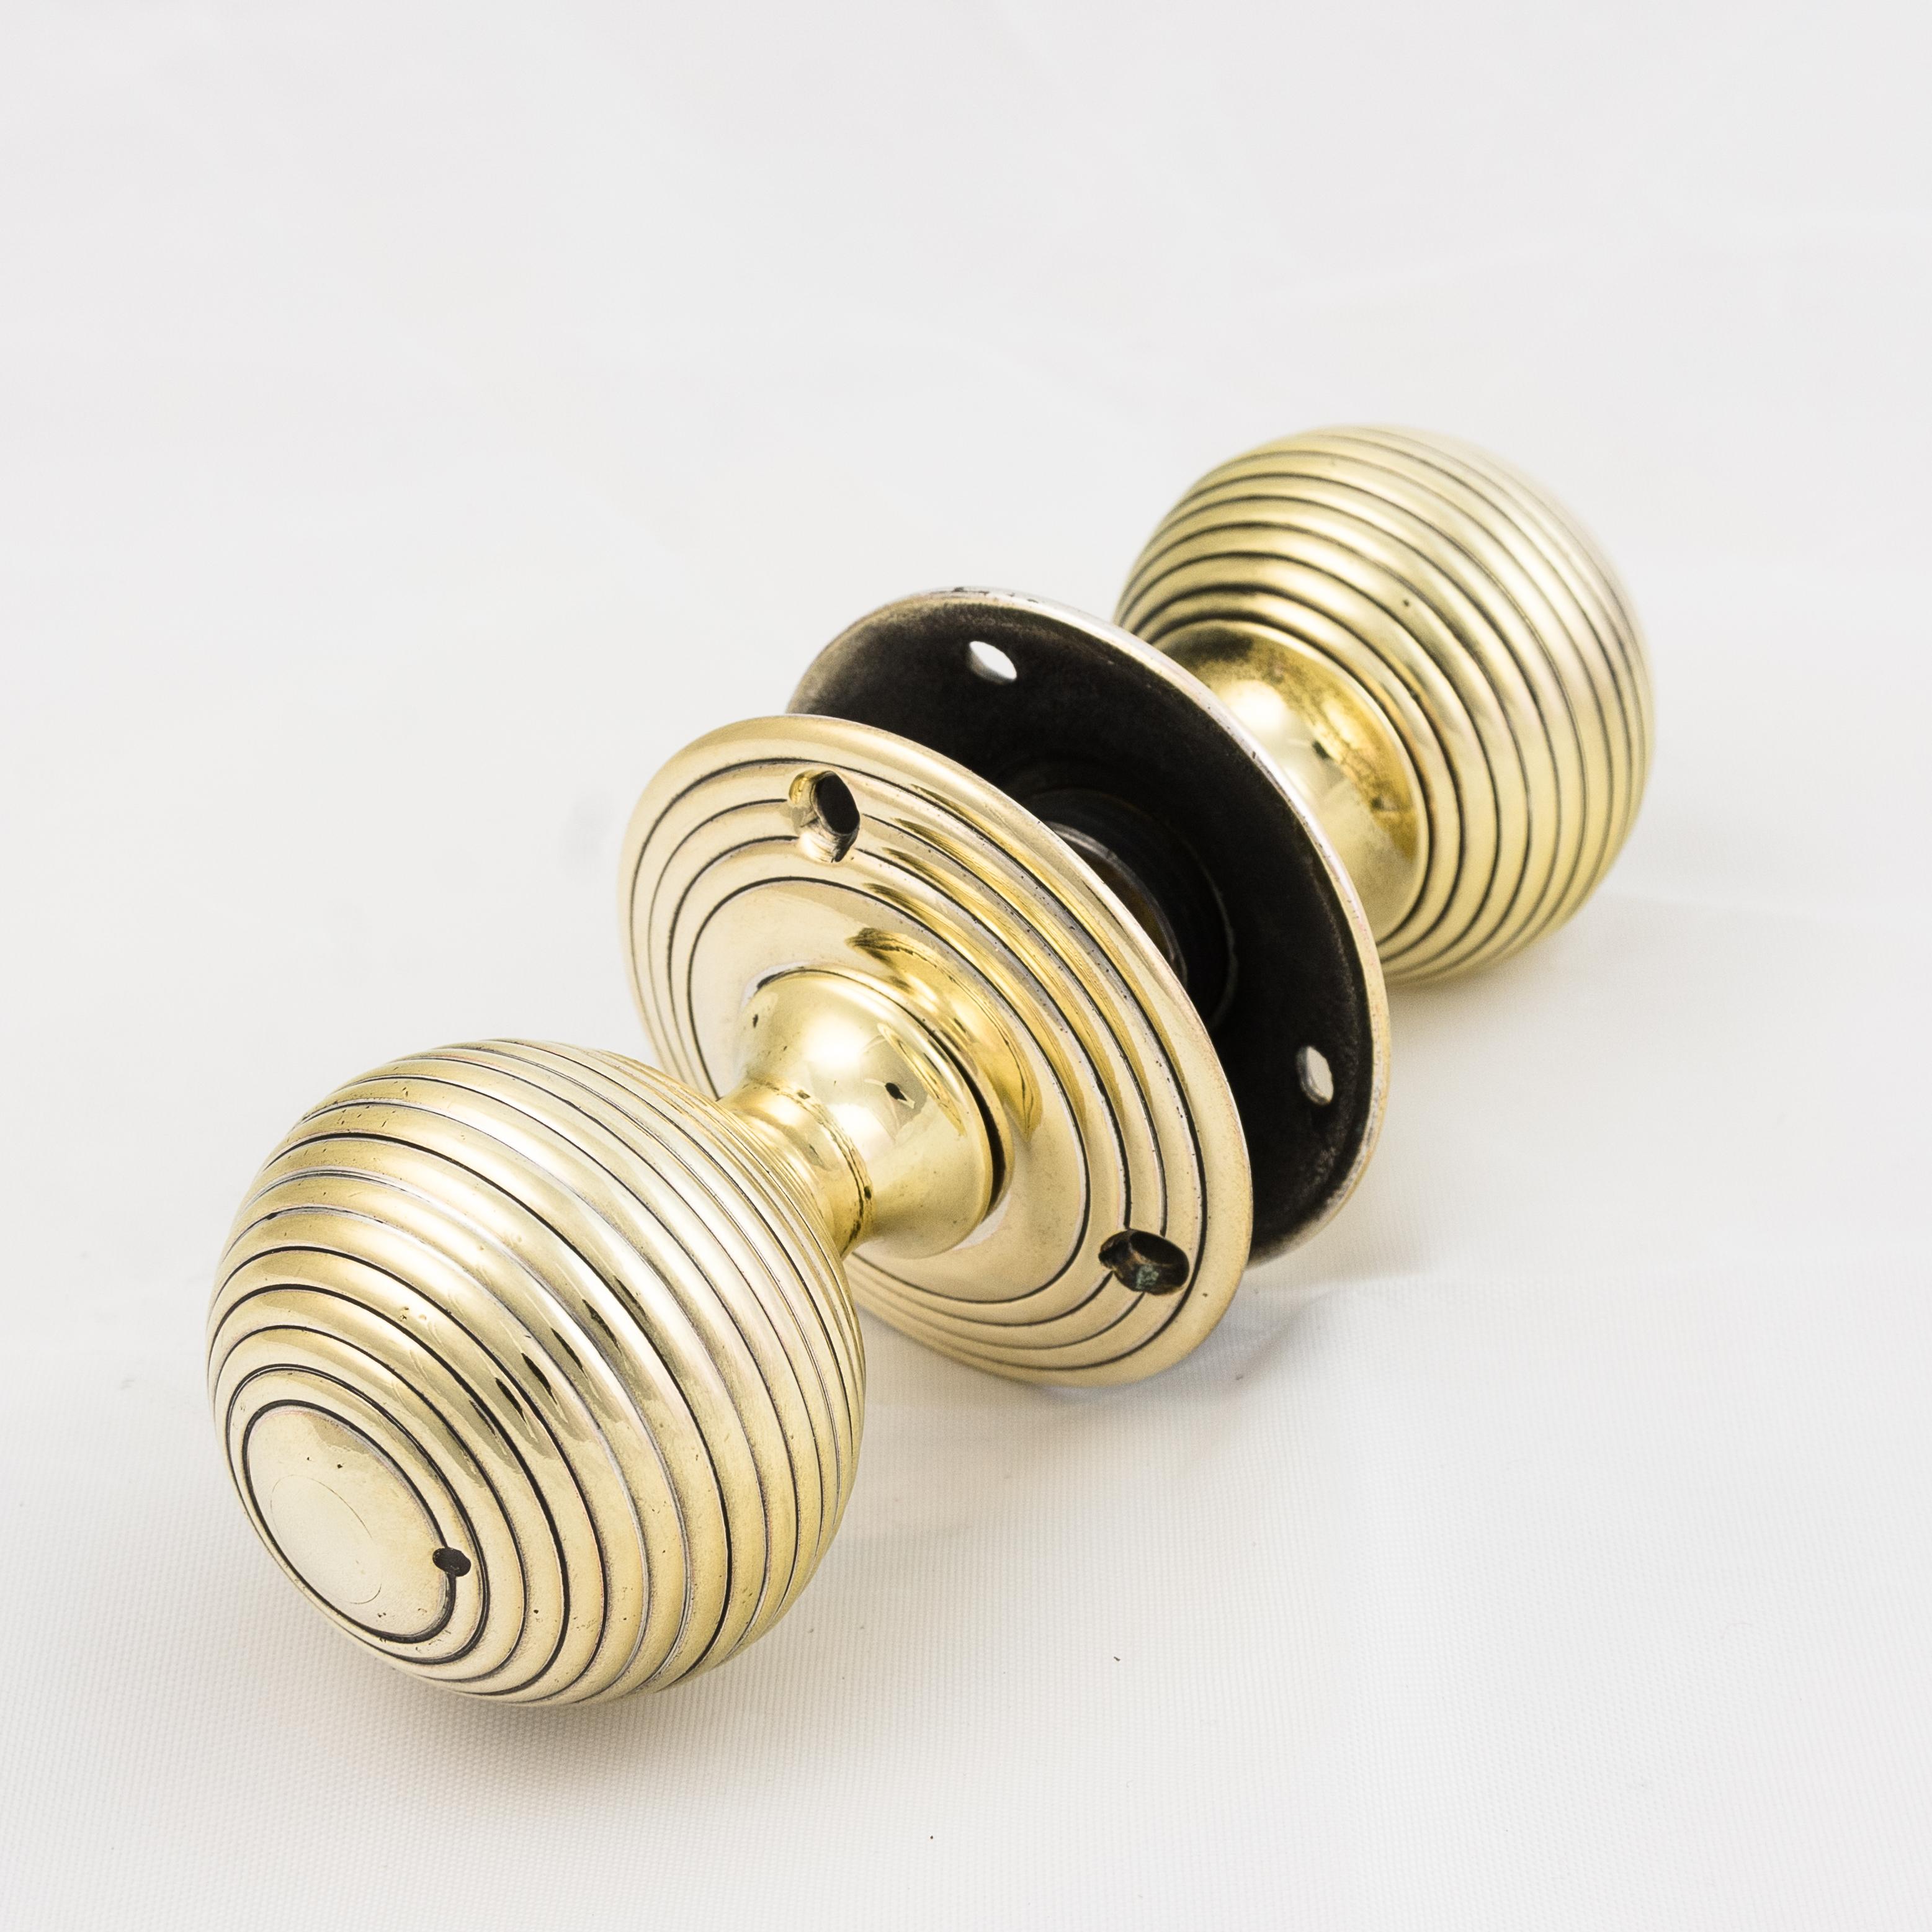 Antique brass beehive door knobs, 19th century, of reeded and of squat form.
Polished, in working order and ready for use.